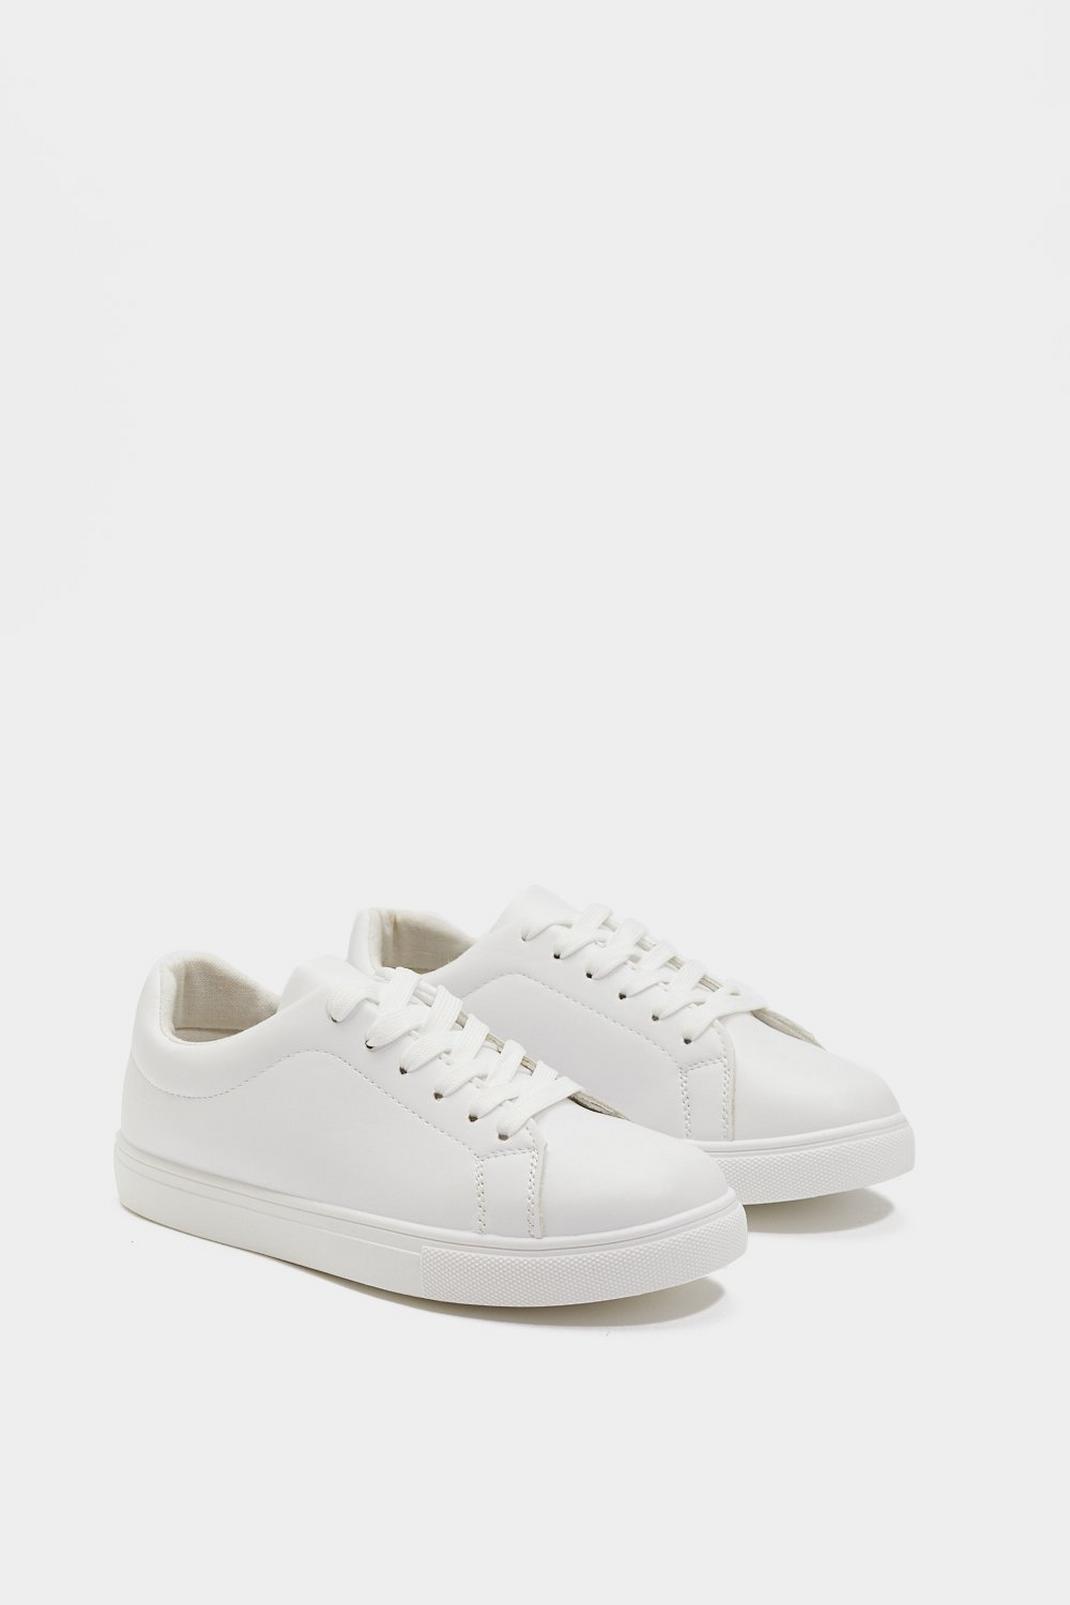 Basic Faux Leather Lace Up Sneakers | Nasty Gal